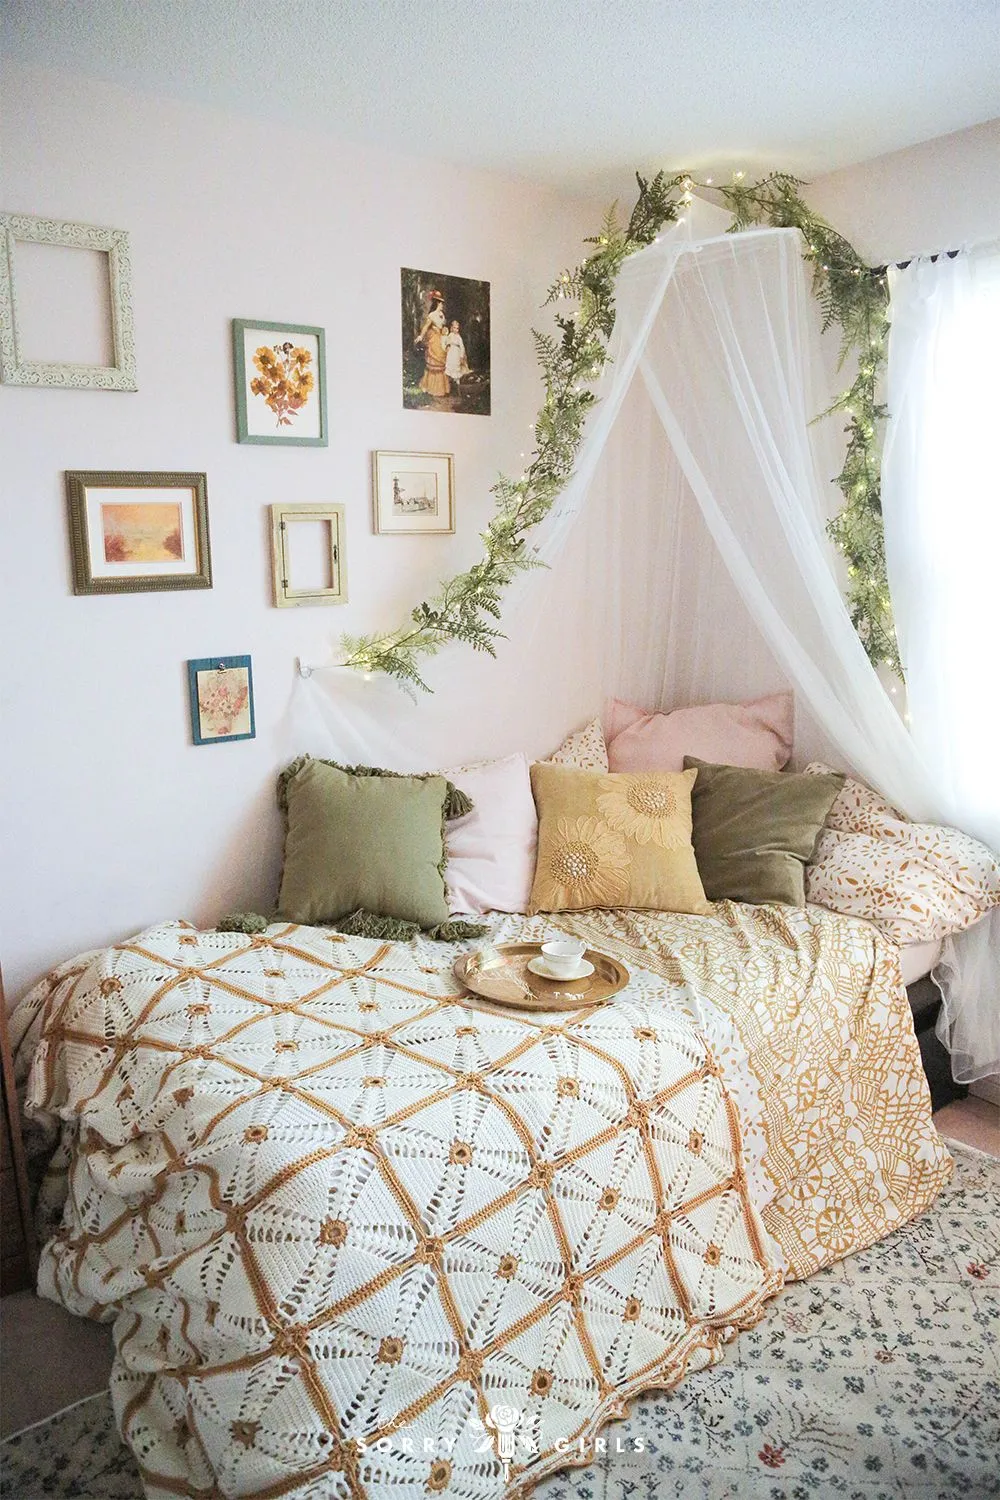 Cottagecore inspired bedroom with gallery wall, crochet bedding and canopy